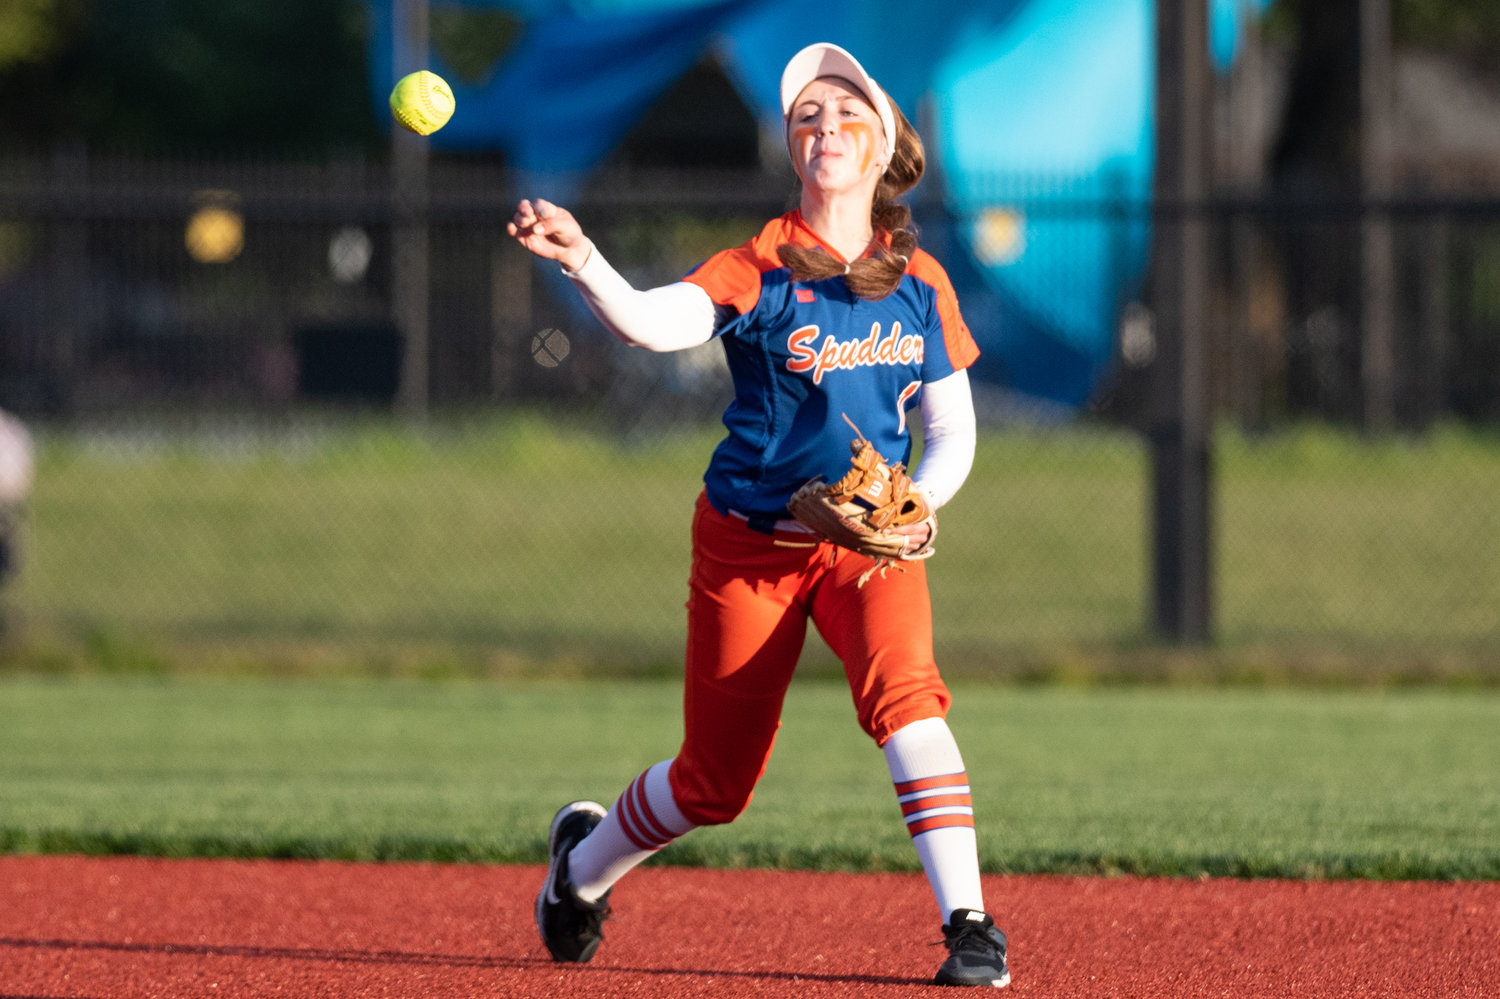 Ridgefield infielder Mallory Vancleave looks to make a throw to first for an out against W.F. West in the 2A District 4 tournament at Recreation Park May 19.